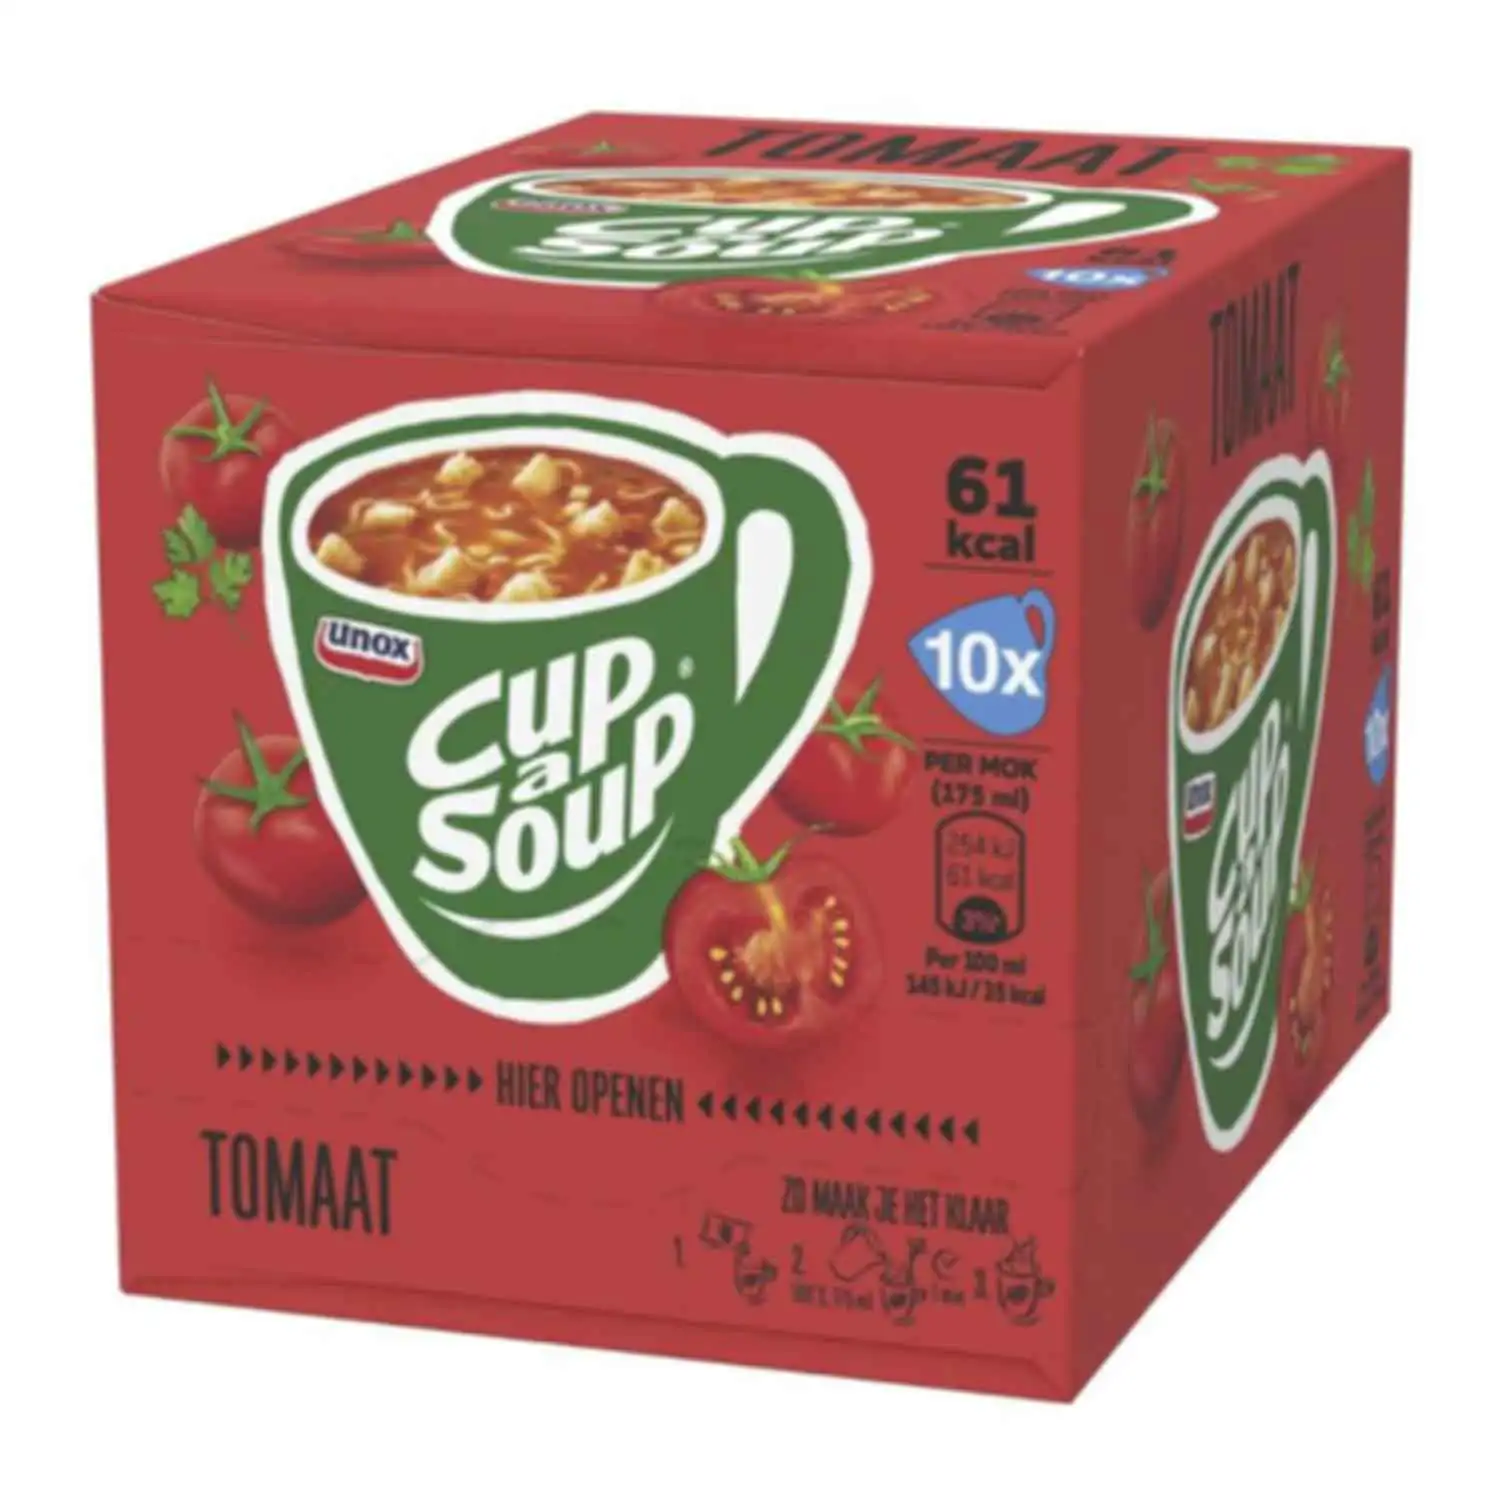 10x Cup a Soup tomate 18g